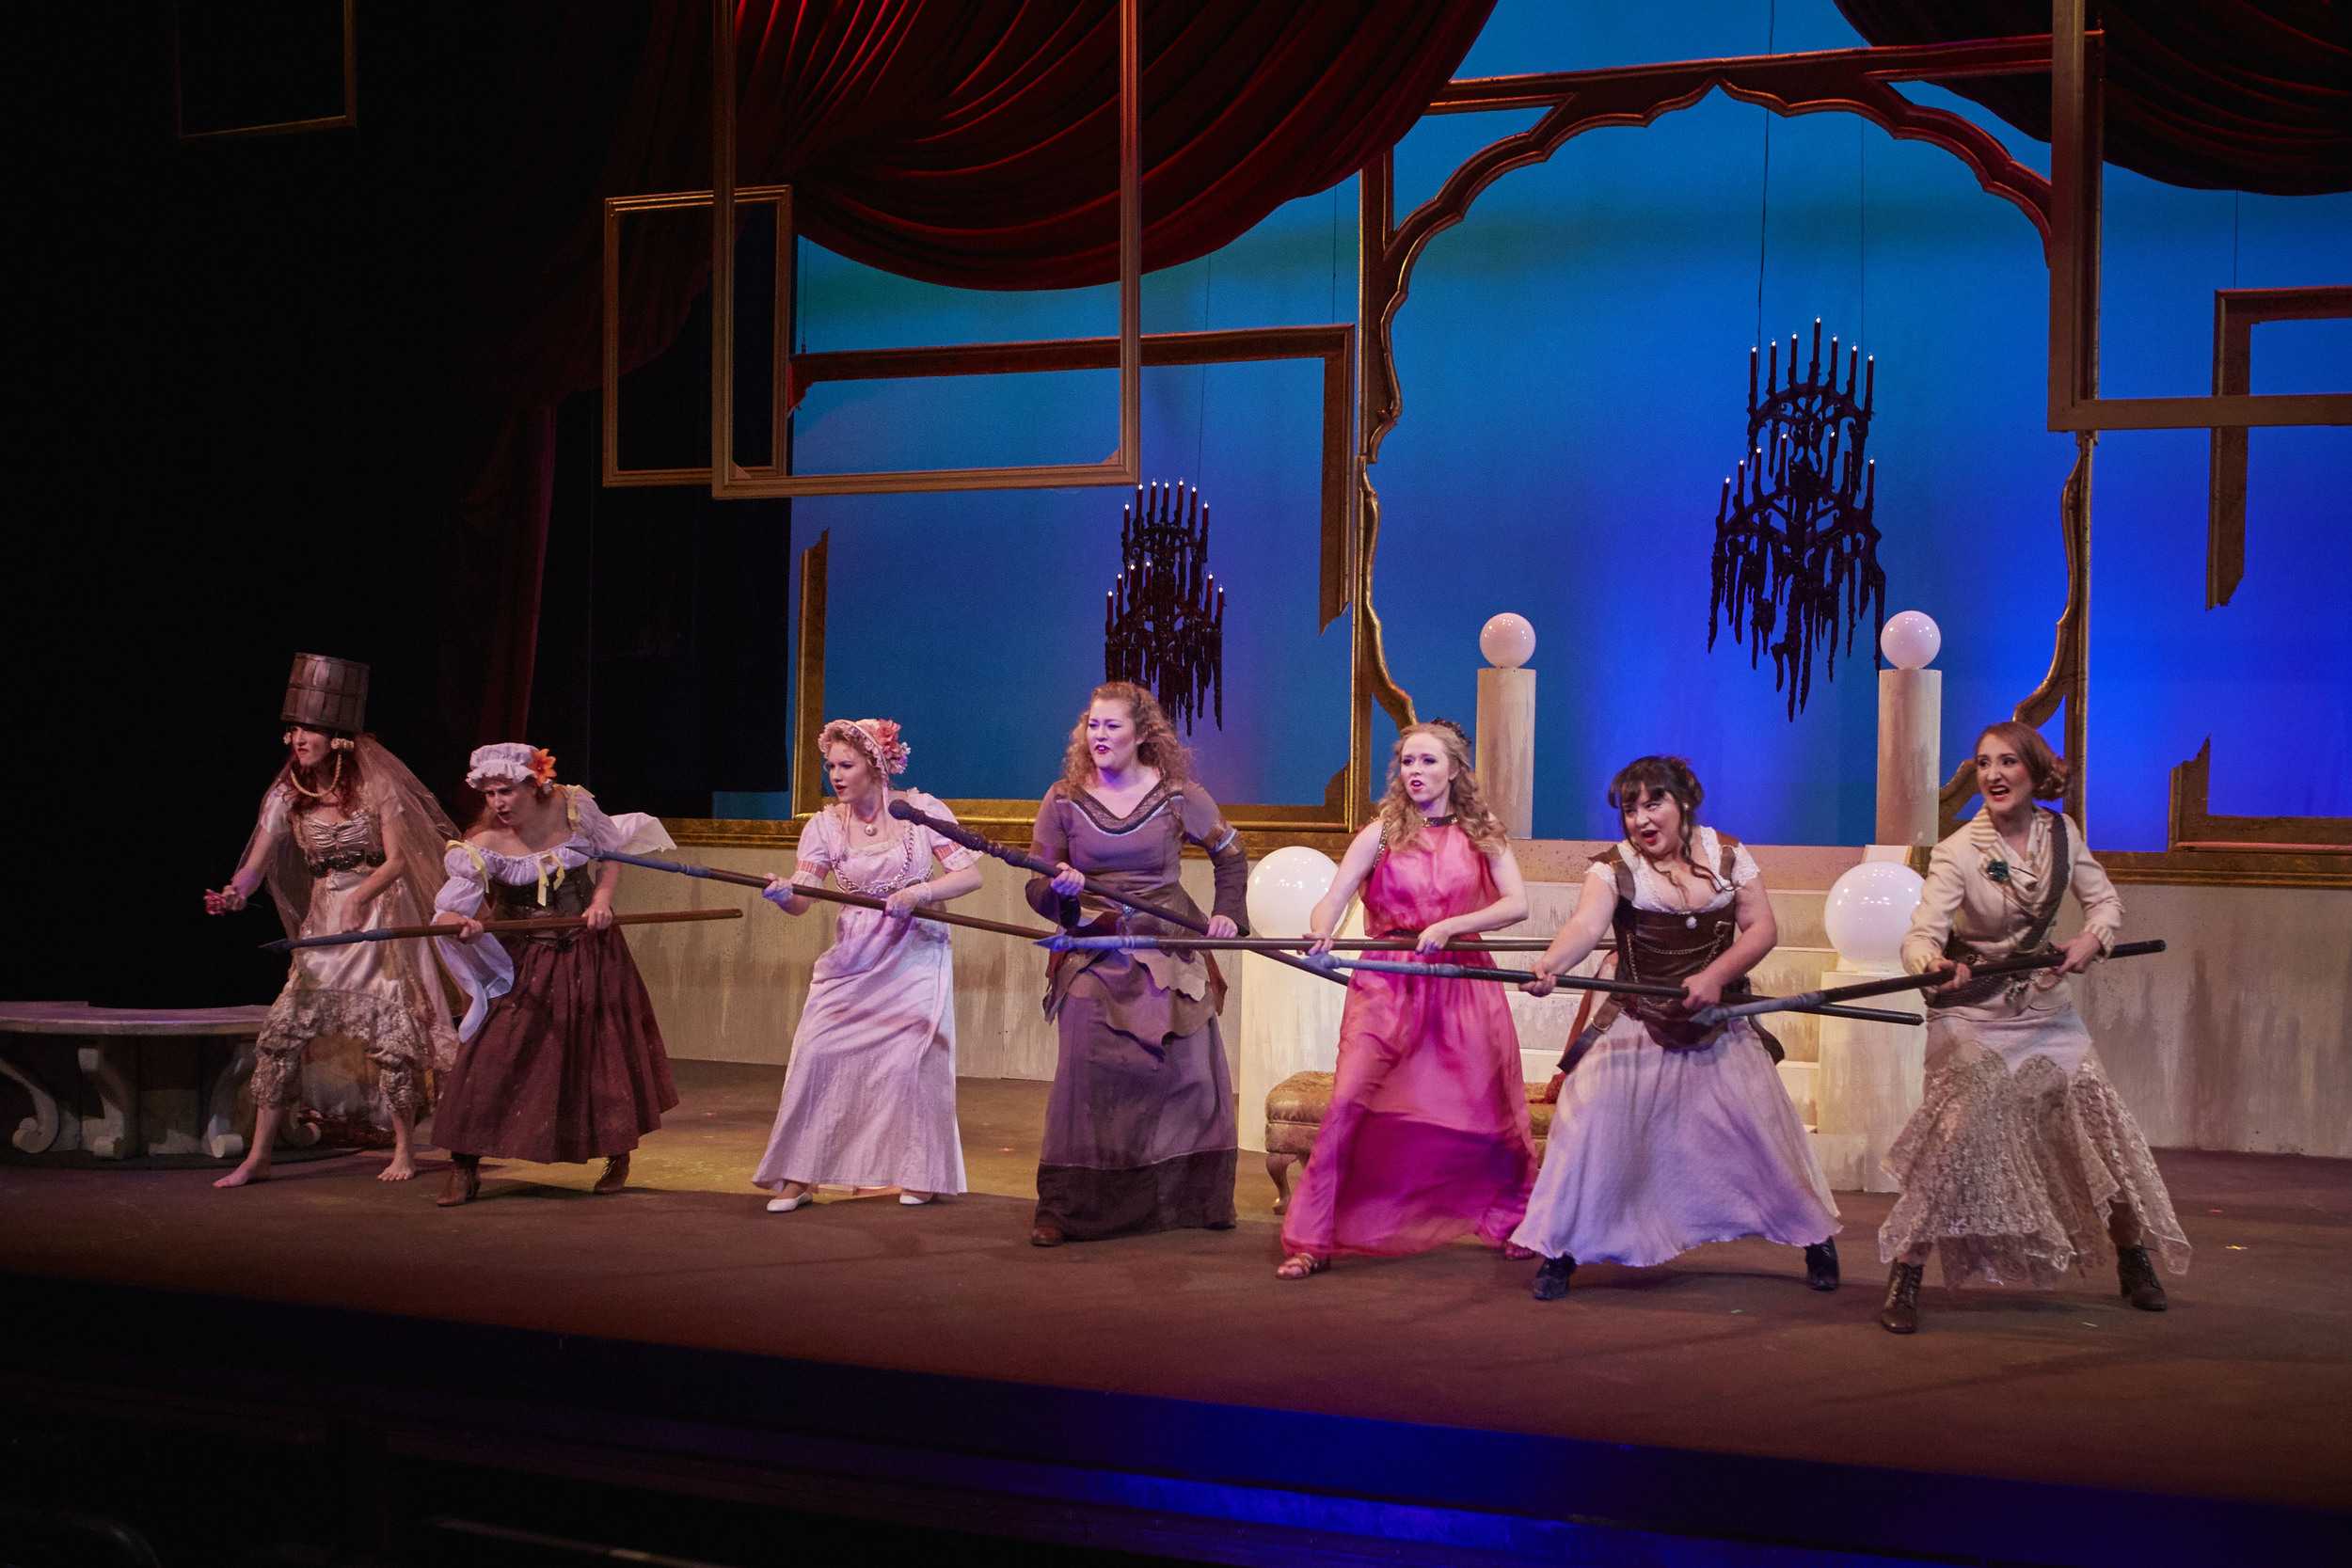 COURTESY // David PapasSonoma State University’s theatre arts and dance department’s production of “Heroines” features seven female heros who are determined to prove their worth and obtain equality.